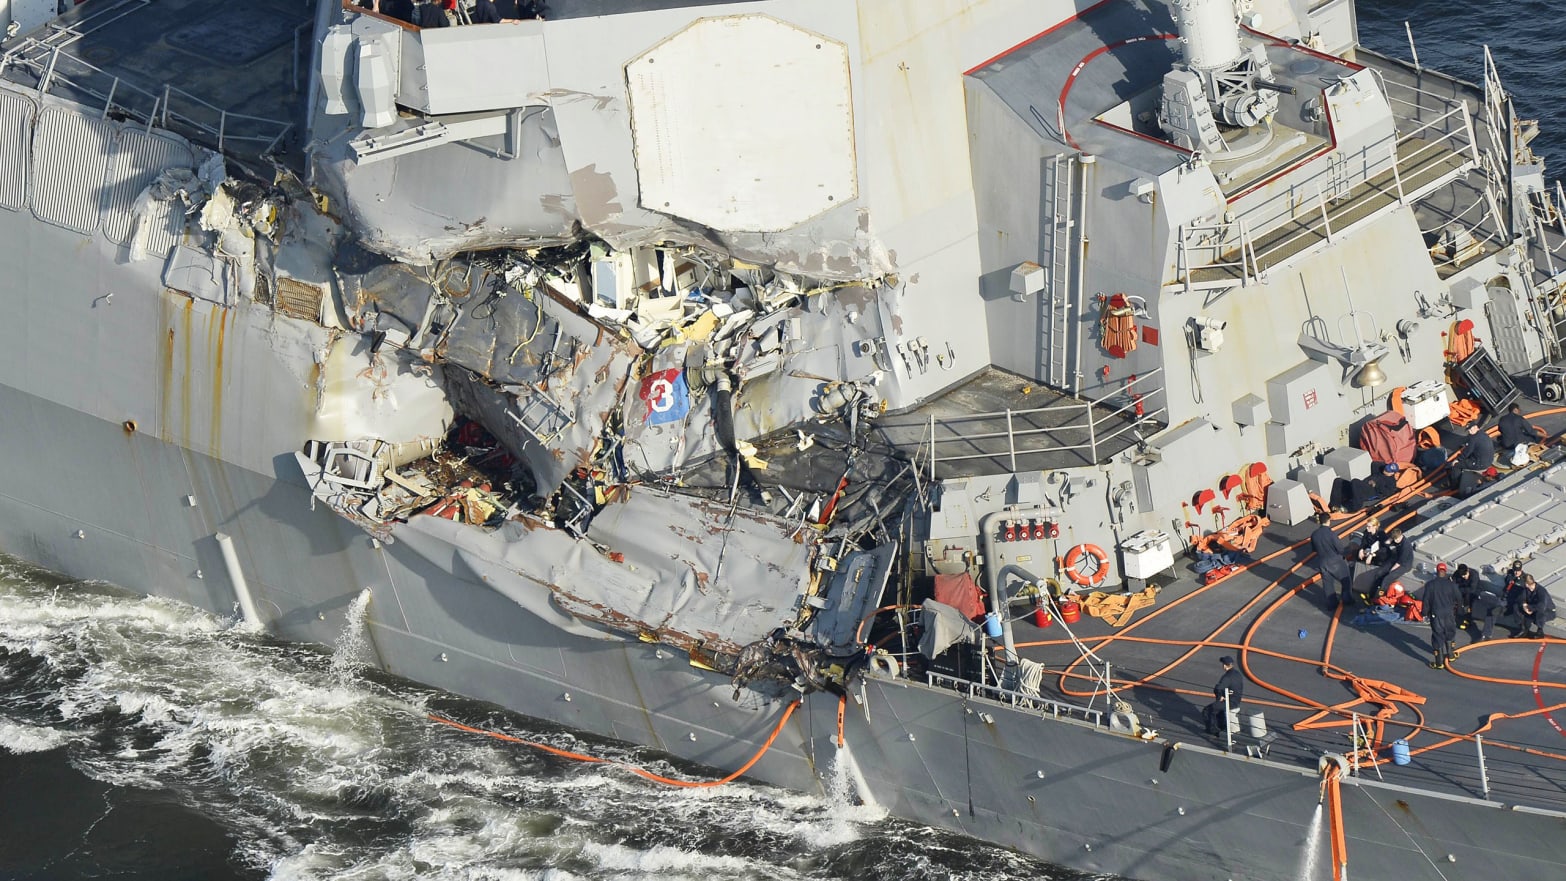 Photo taken in June 2017 shows the U.S. Navy destroyer Fitzgerald after a fatal collision with a Filipino container ship off the Japan coast.